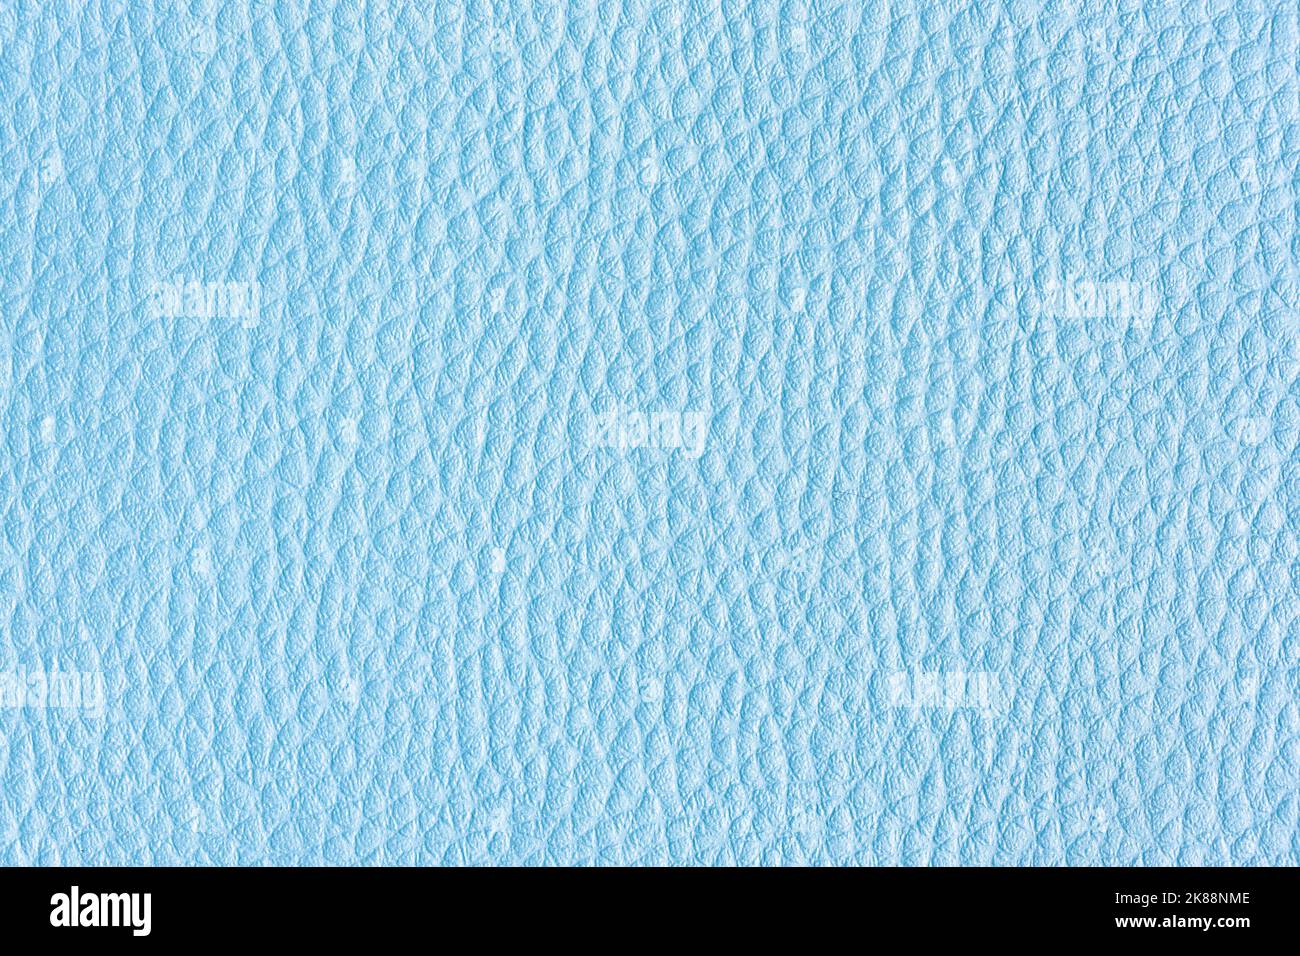 Blue Leather background texture. Full frame Stock Photo